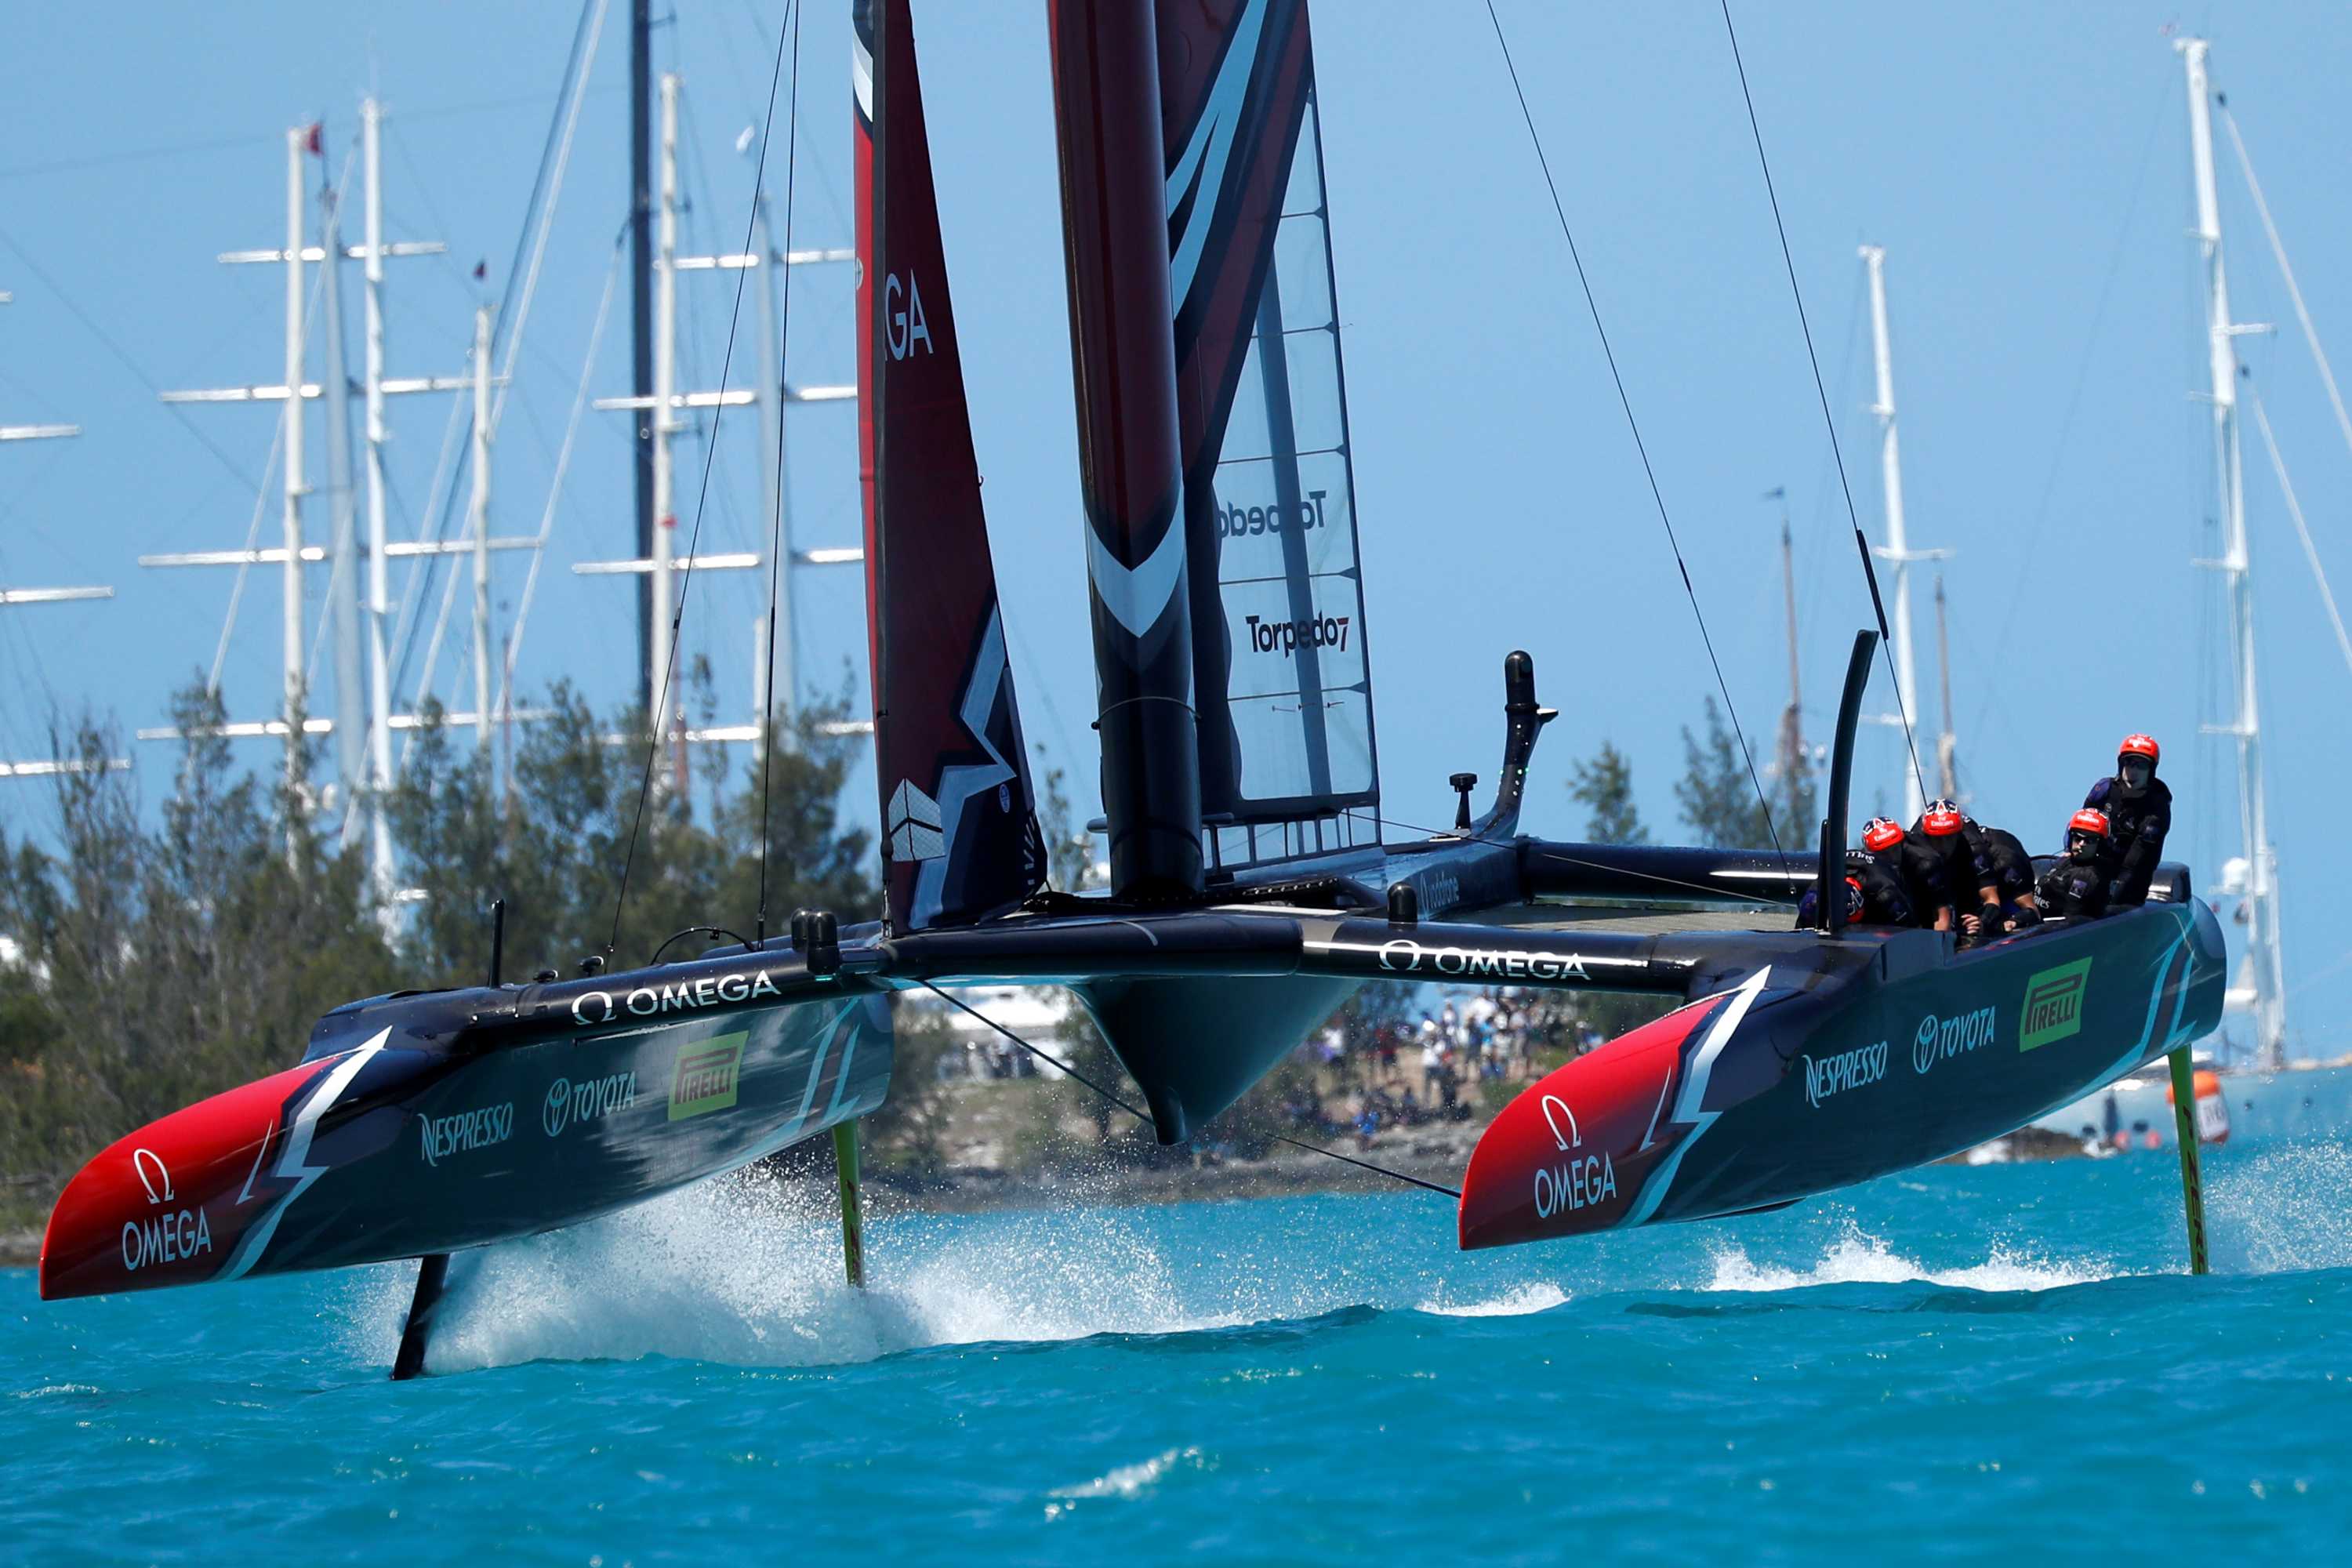 America's Cup explained: How the yachts appear to 'fly' - ABC News